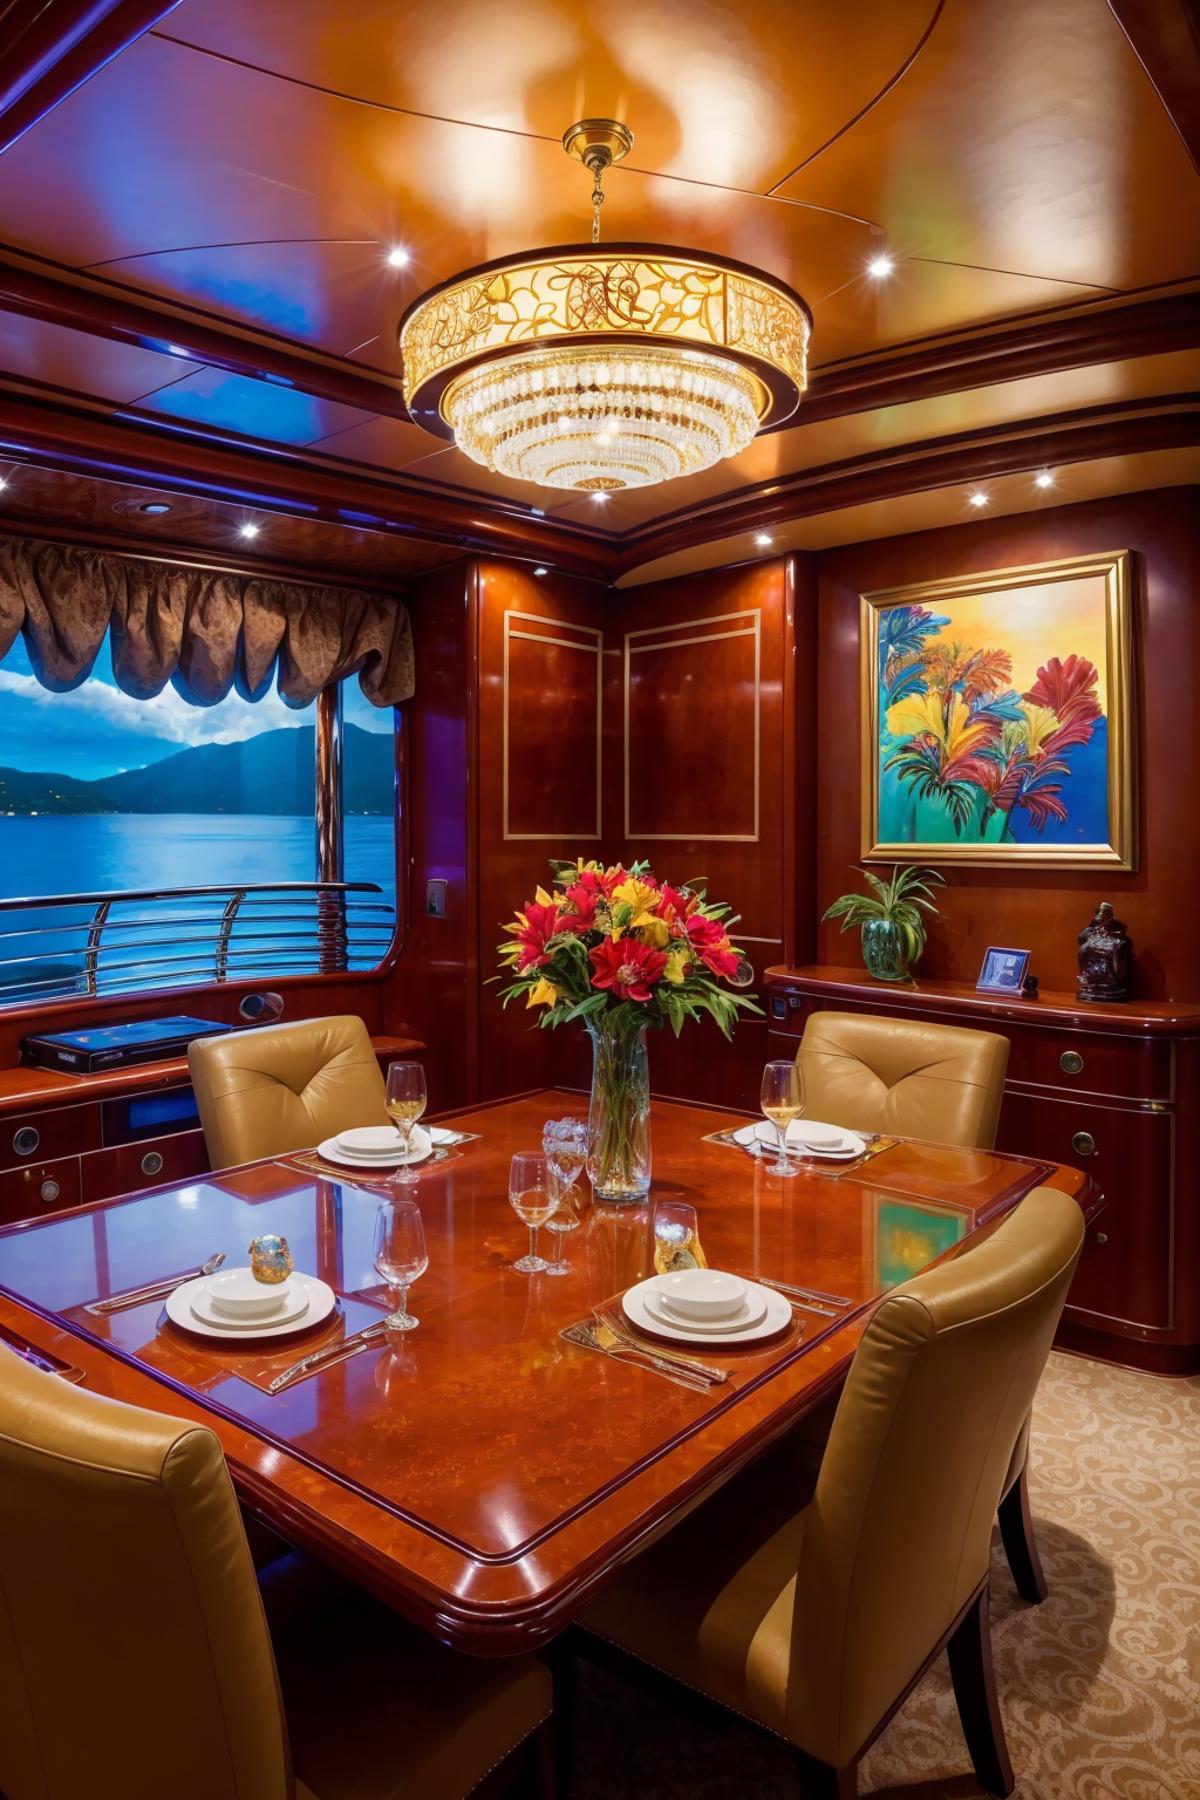 A wooden table with a vase of flowers and wine glasses on a luxury boat.